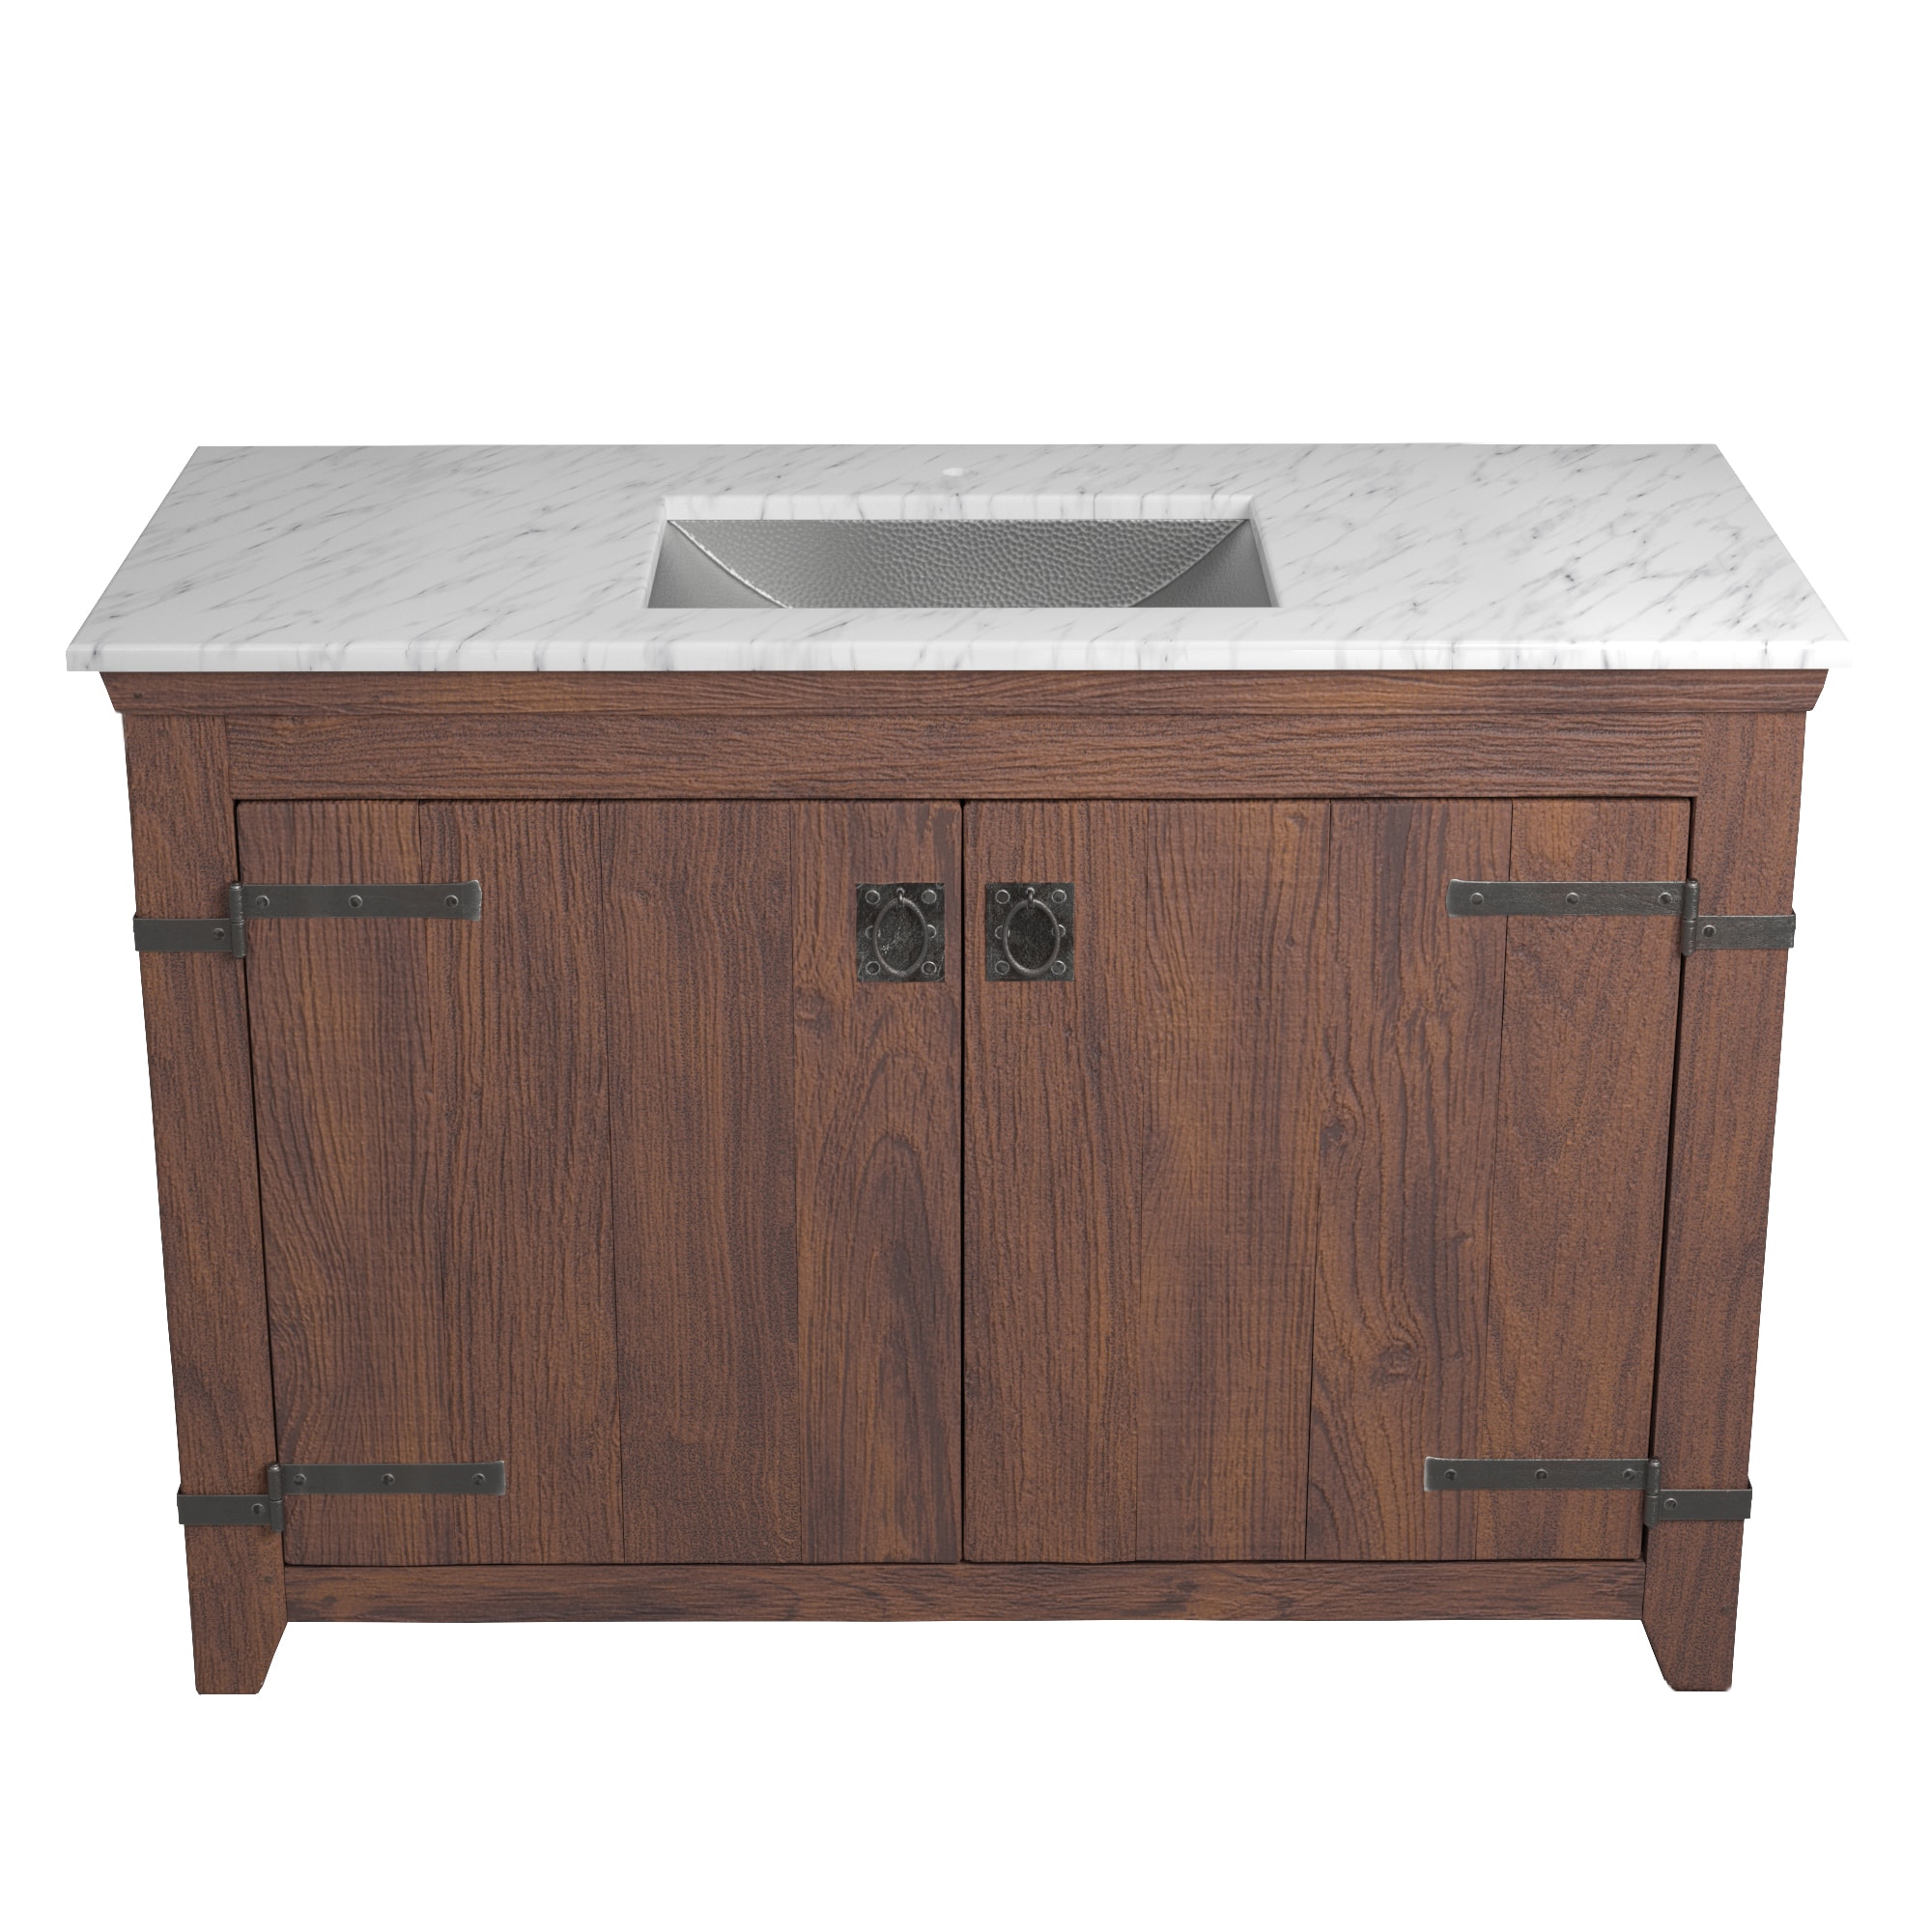 Native Trails 48" Americana Vanity in Chestnut with Carrara Marble Top and Avila in Brushed Nickel, Single Faucet Hole, BND48-VB-CT-CP-019